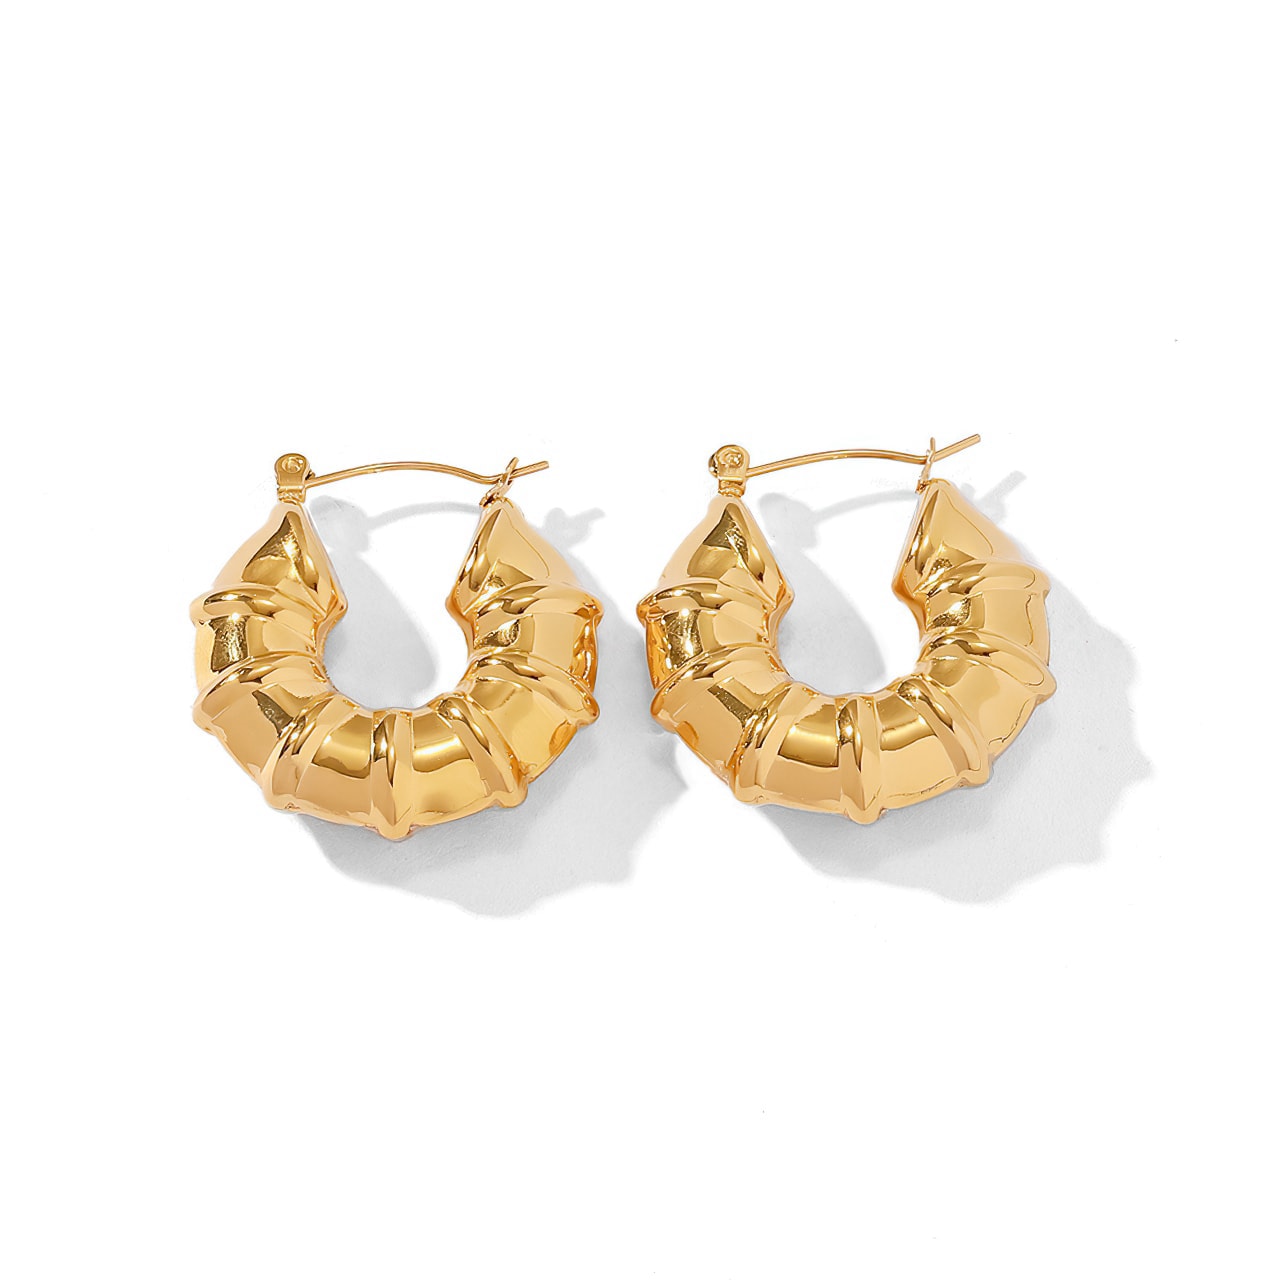 Minimalist Personalized INS Style 18k Gold-Plated Earrings - HUNTER